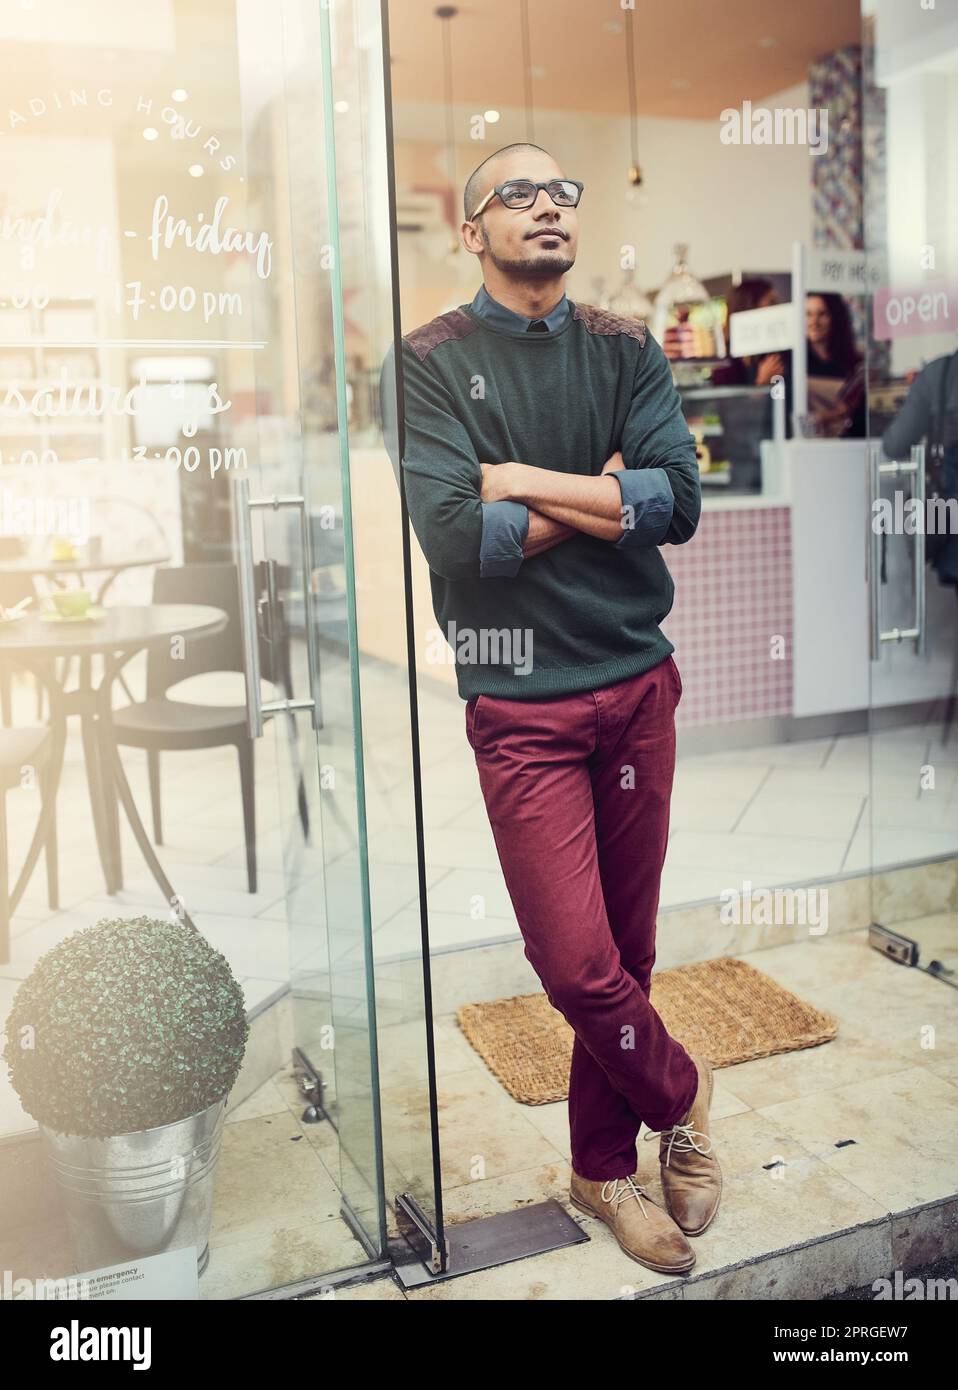 Achieving his goals. a young man standing in the entrance of a cafe. Stock Photo